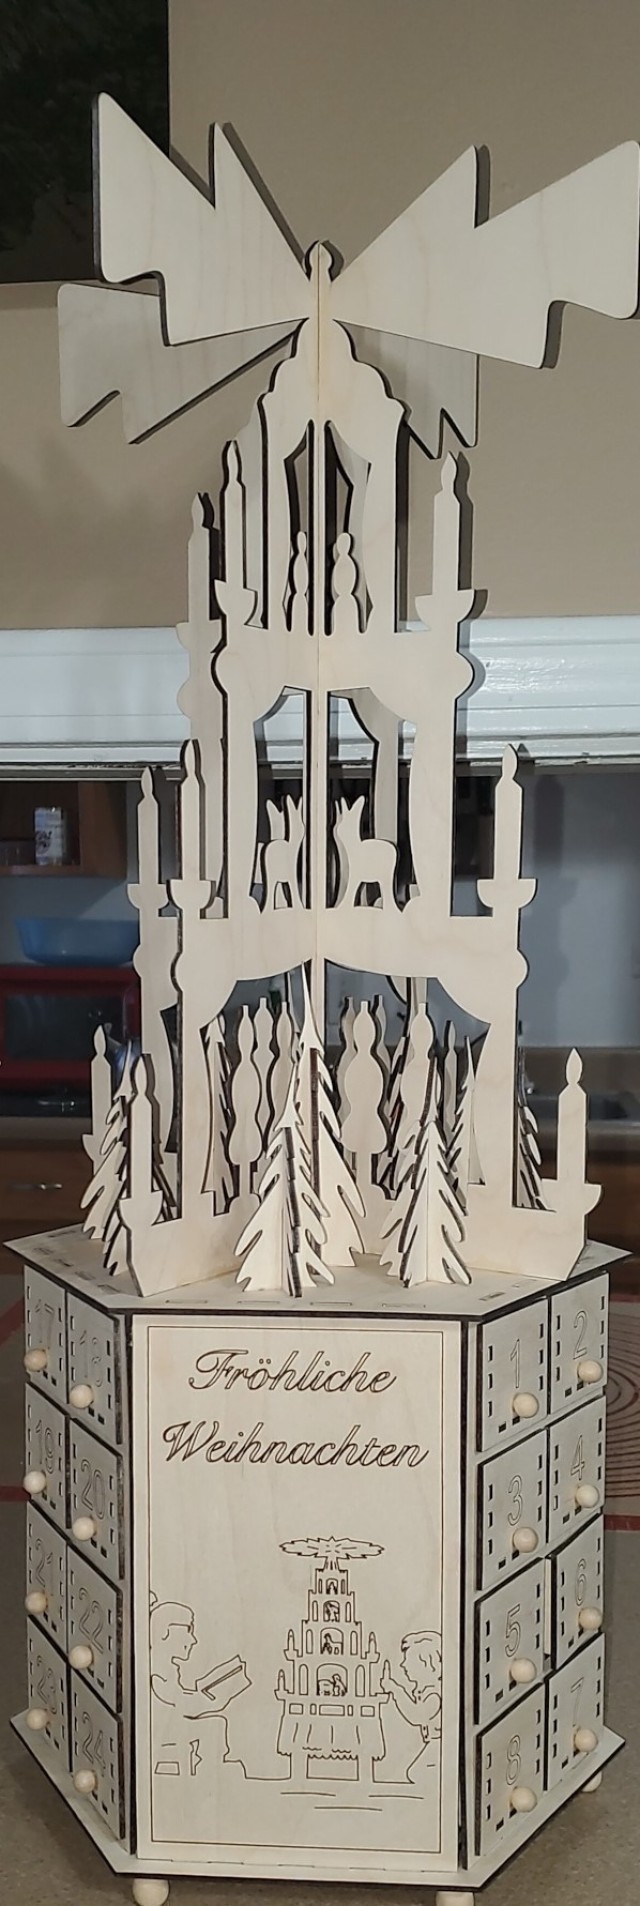 Chaplain (Col.) Gregory Swift, command chaplain, 1st Theater Sustainment Command, created this German-inspired Christmas tower out of Baltic birch wood using computer numerical control equipment in 2019 at Fort Knox, Kentucky. Wood working is a lifelong hobby for the chaplain.